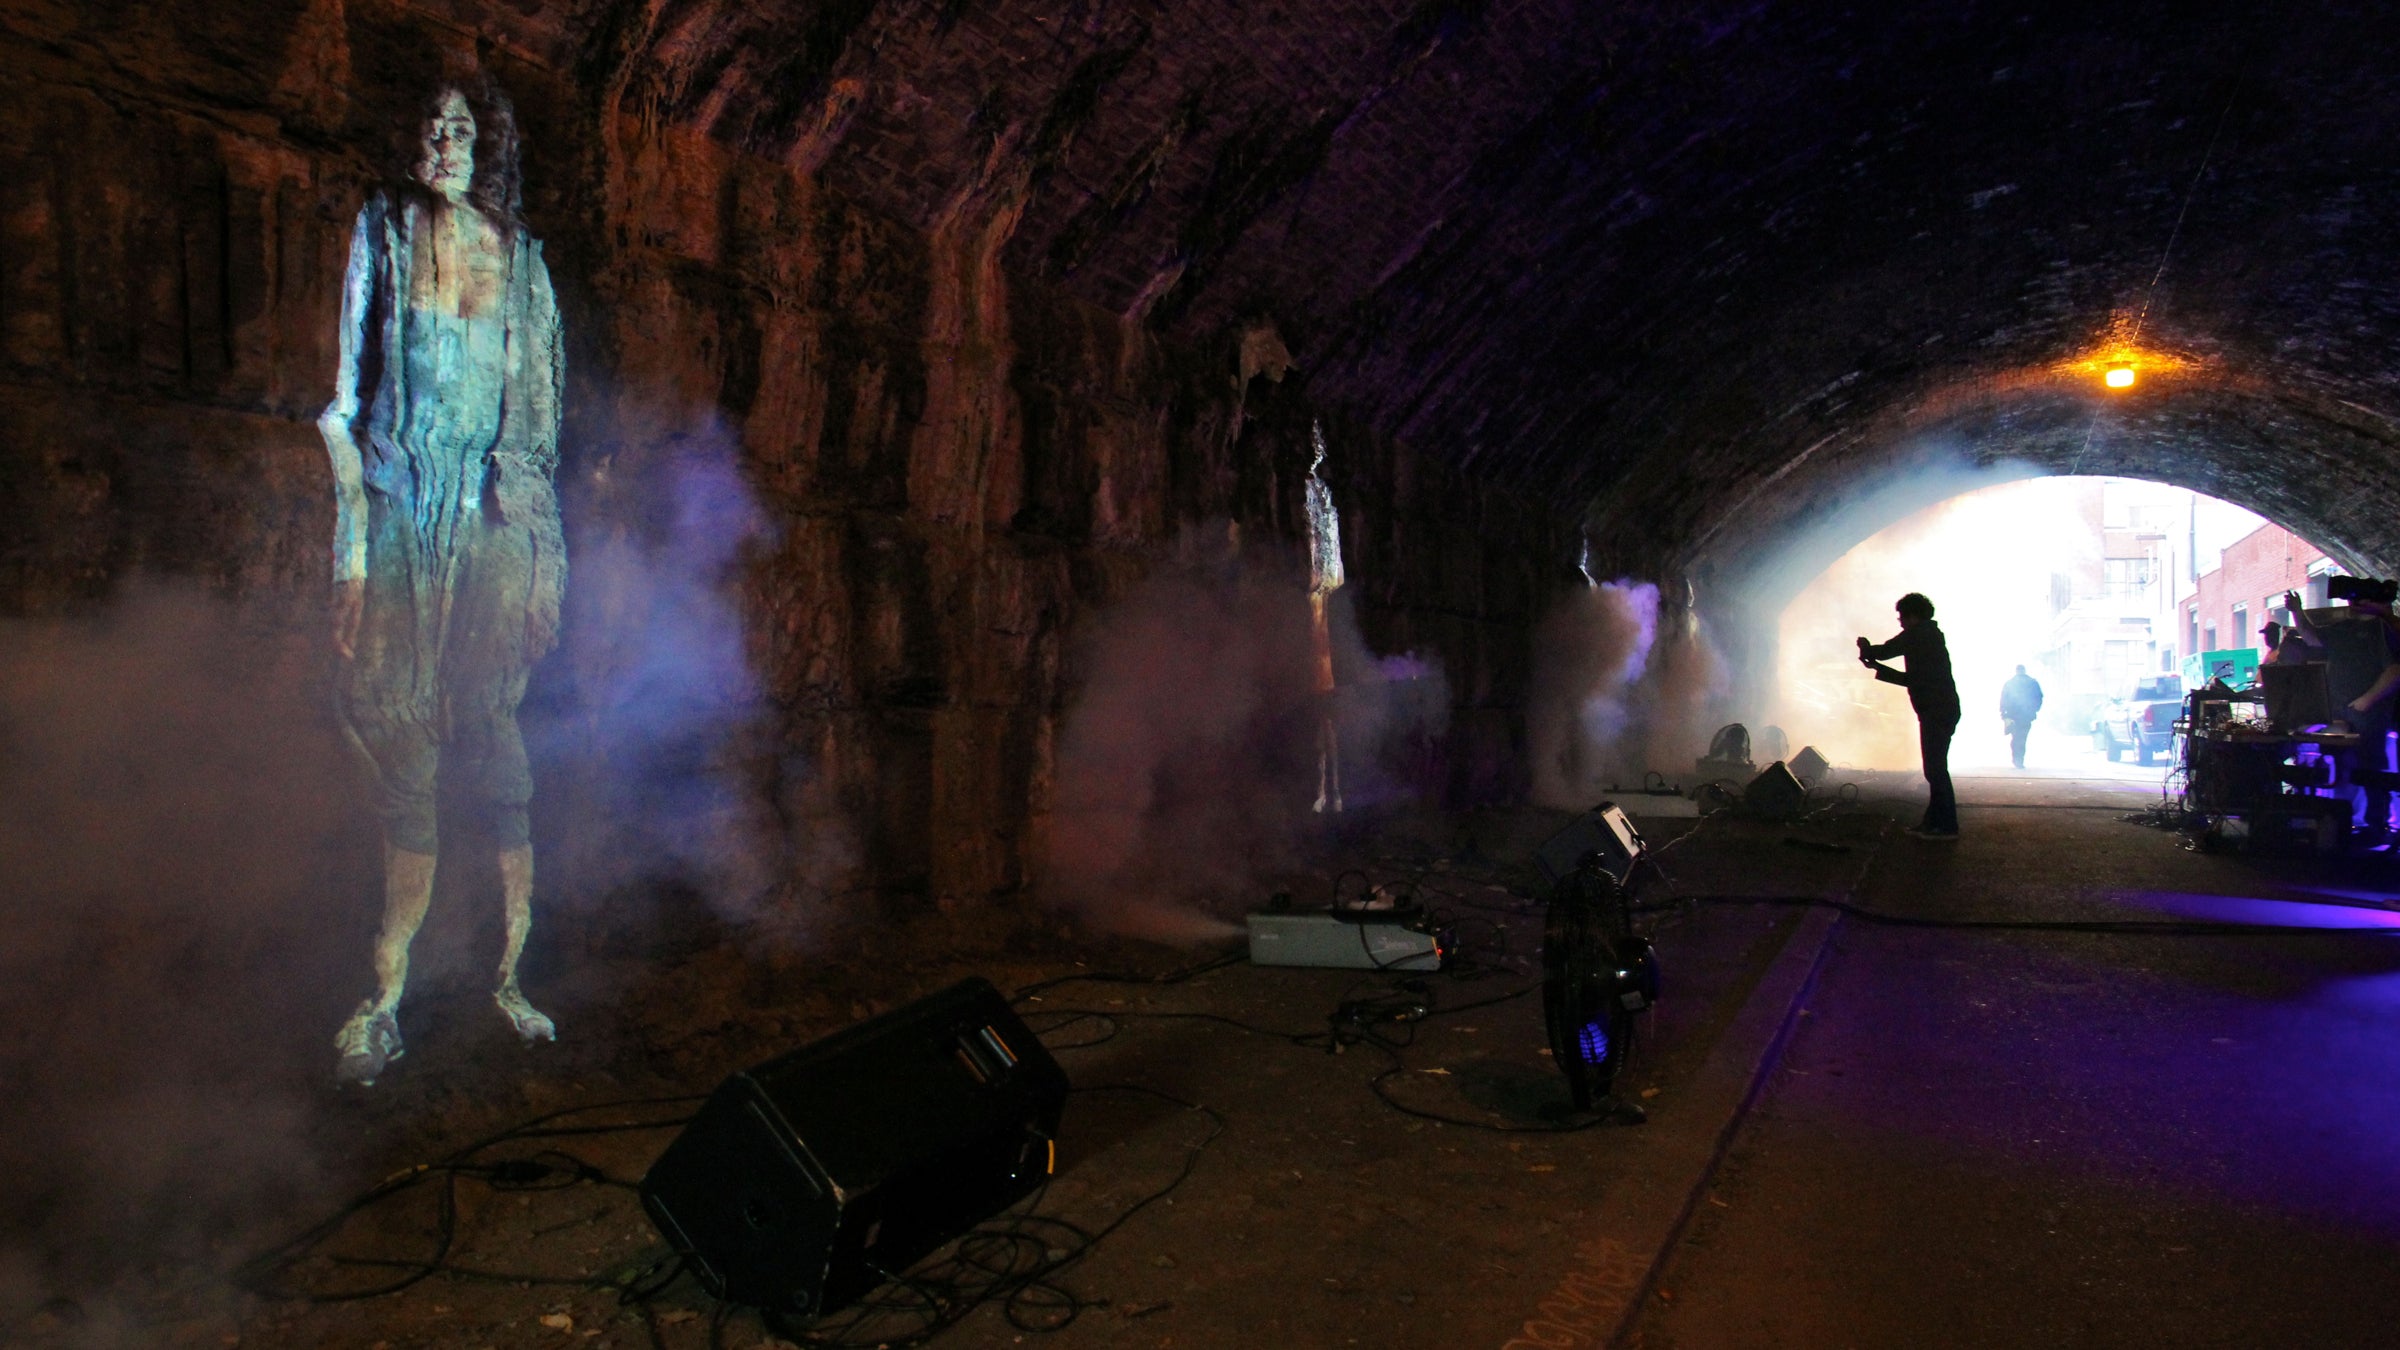  Smoke machines produce an eerie mist as four projected women sing their stories under the under the Reading Viaduct at Carlton Street. (Emma Lee/WHYY) 